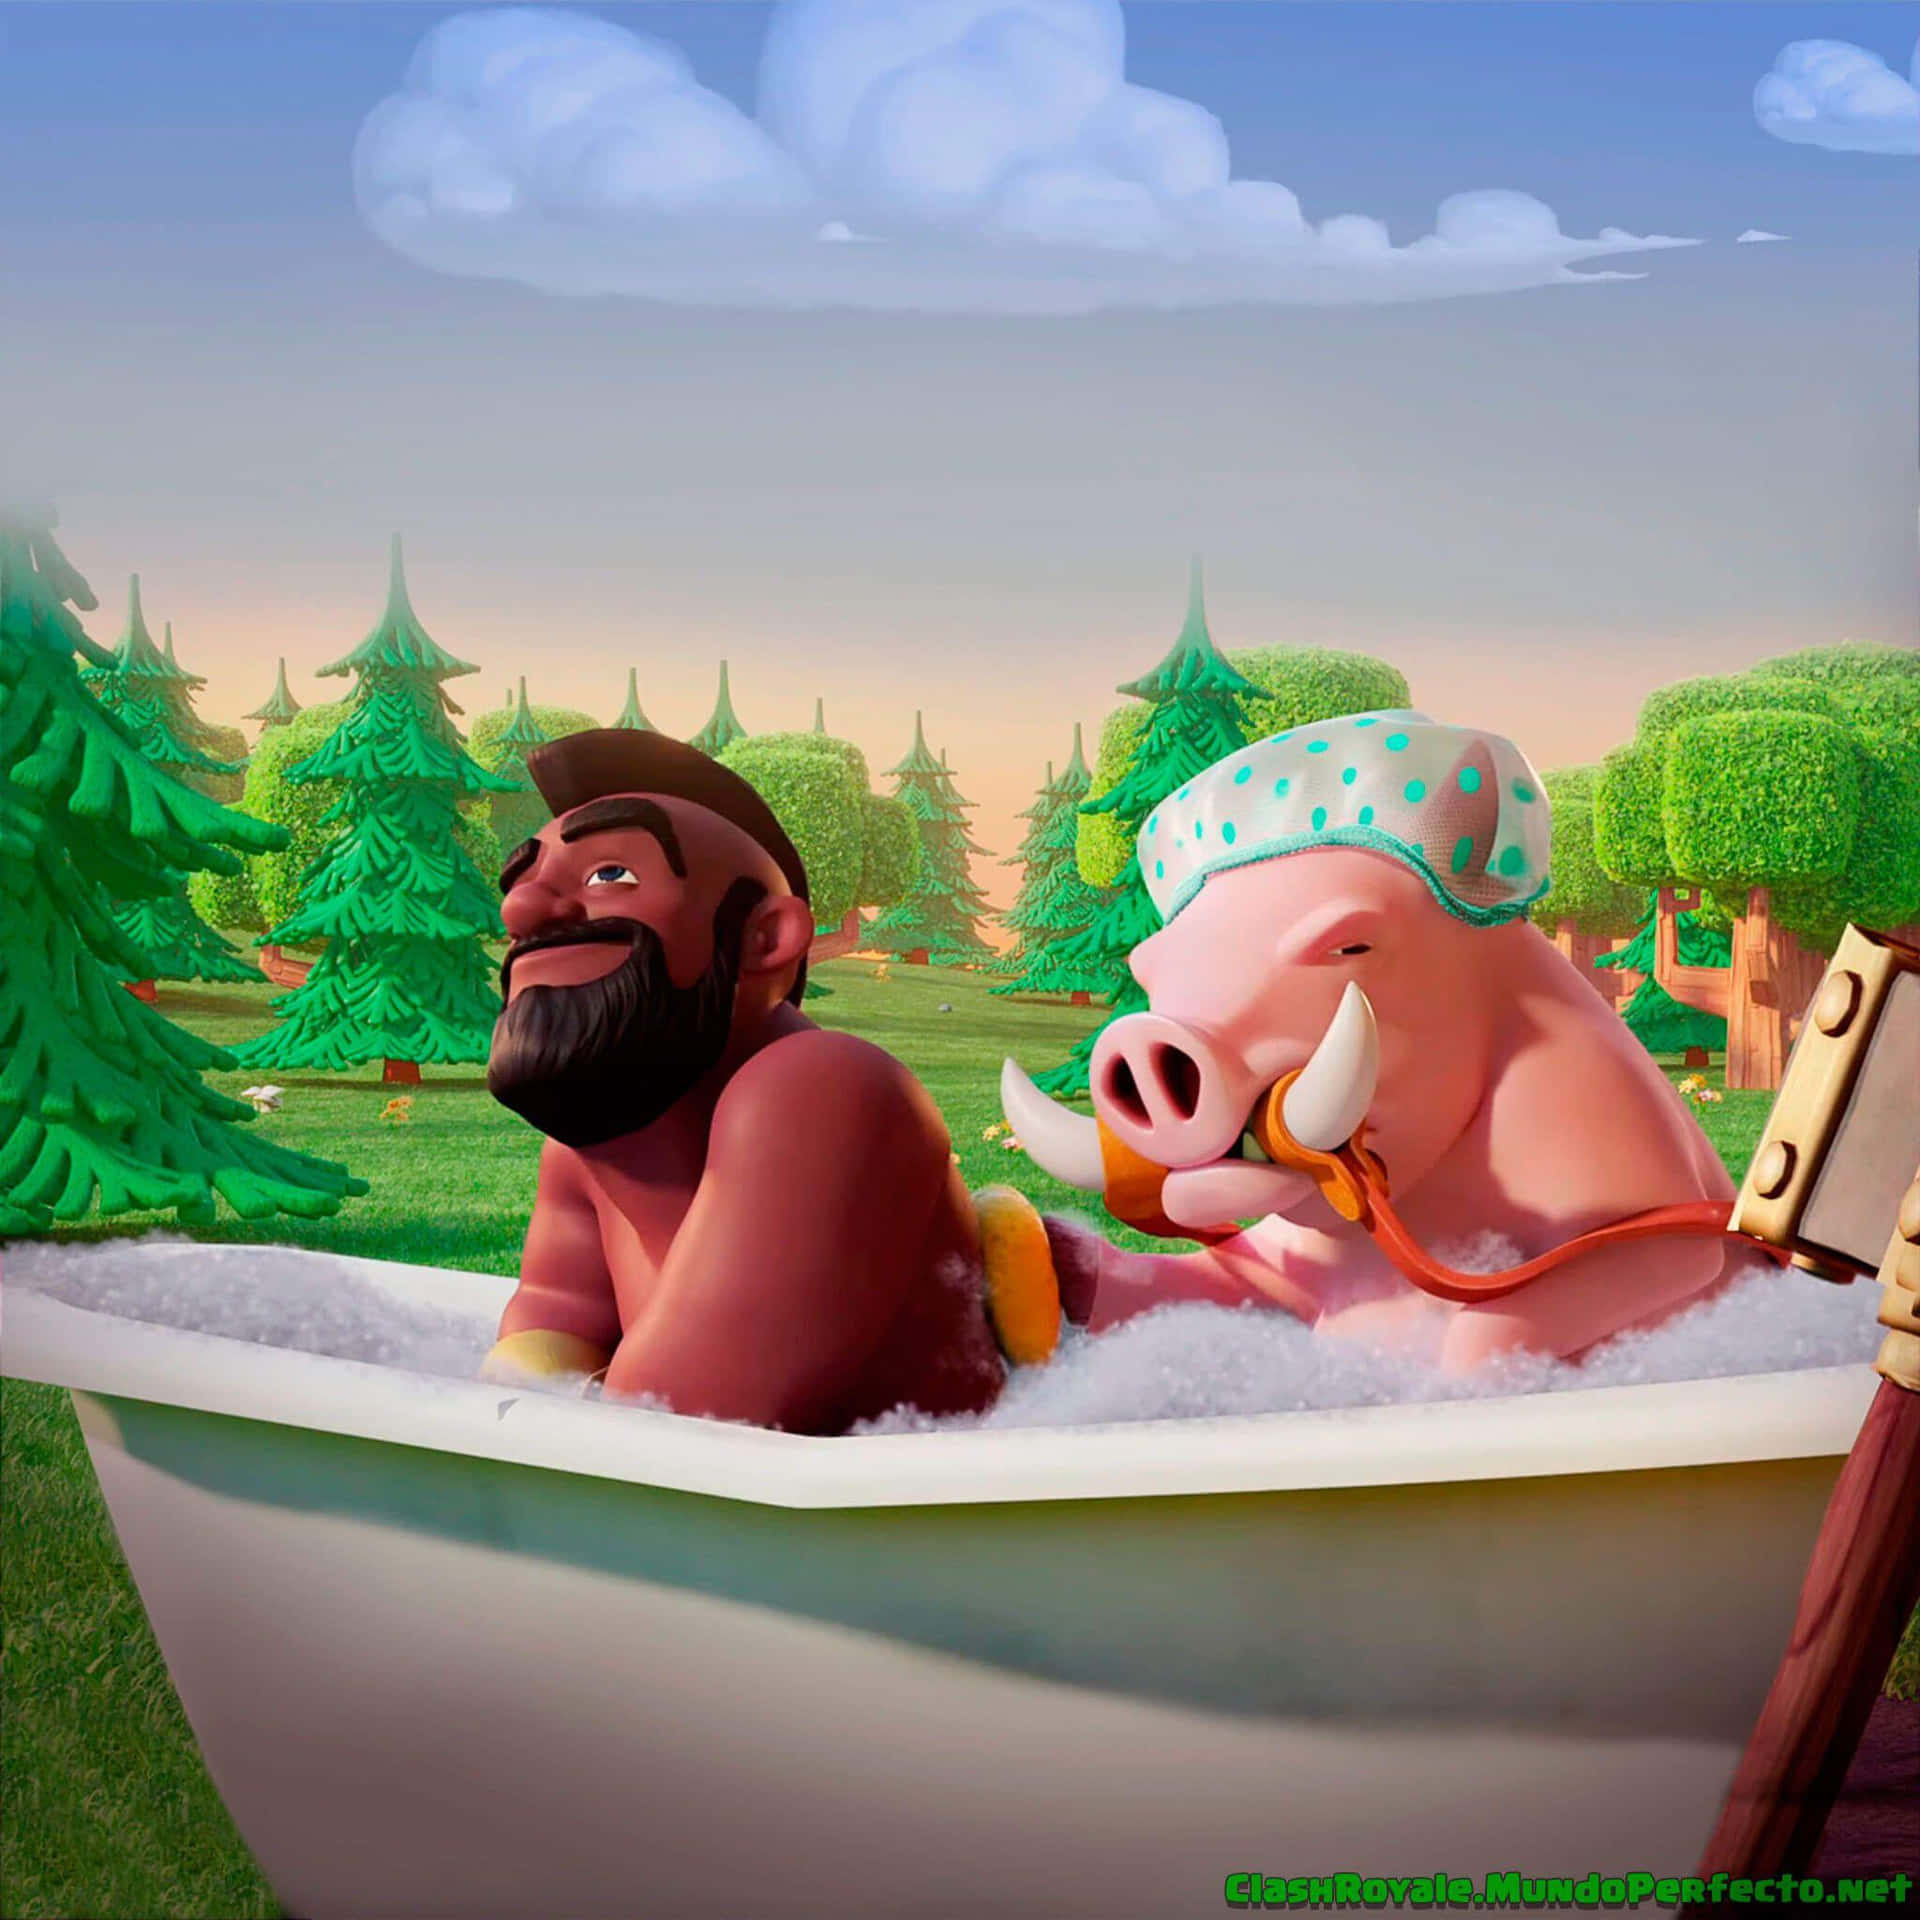 Clash Of Clans Pig In The Bath